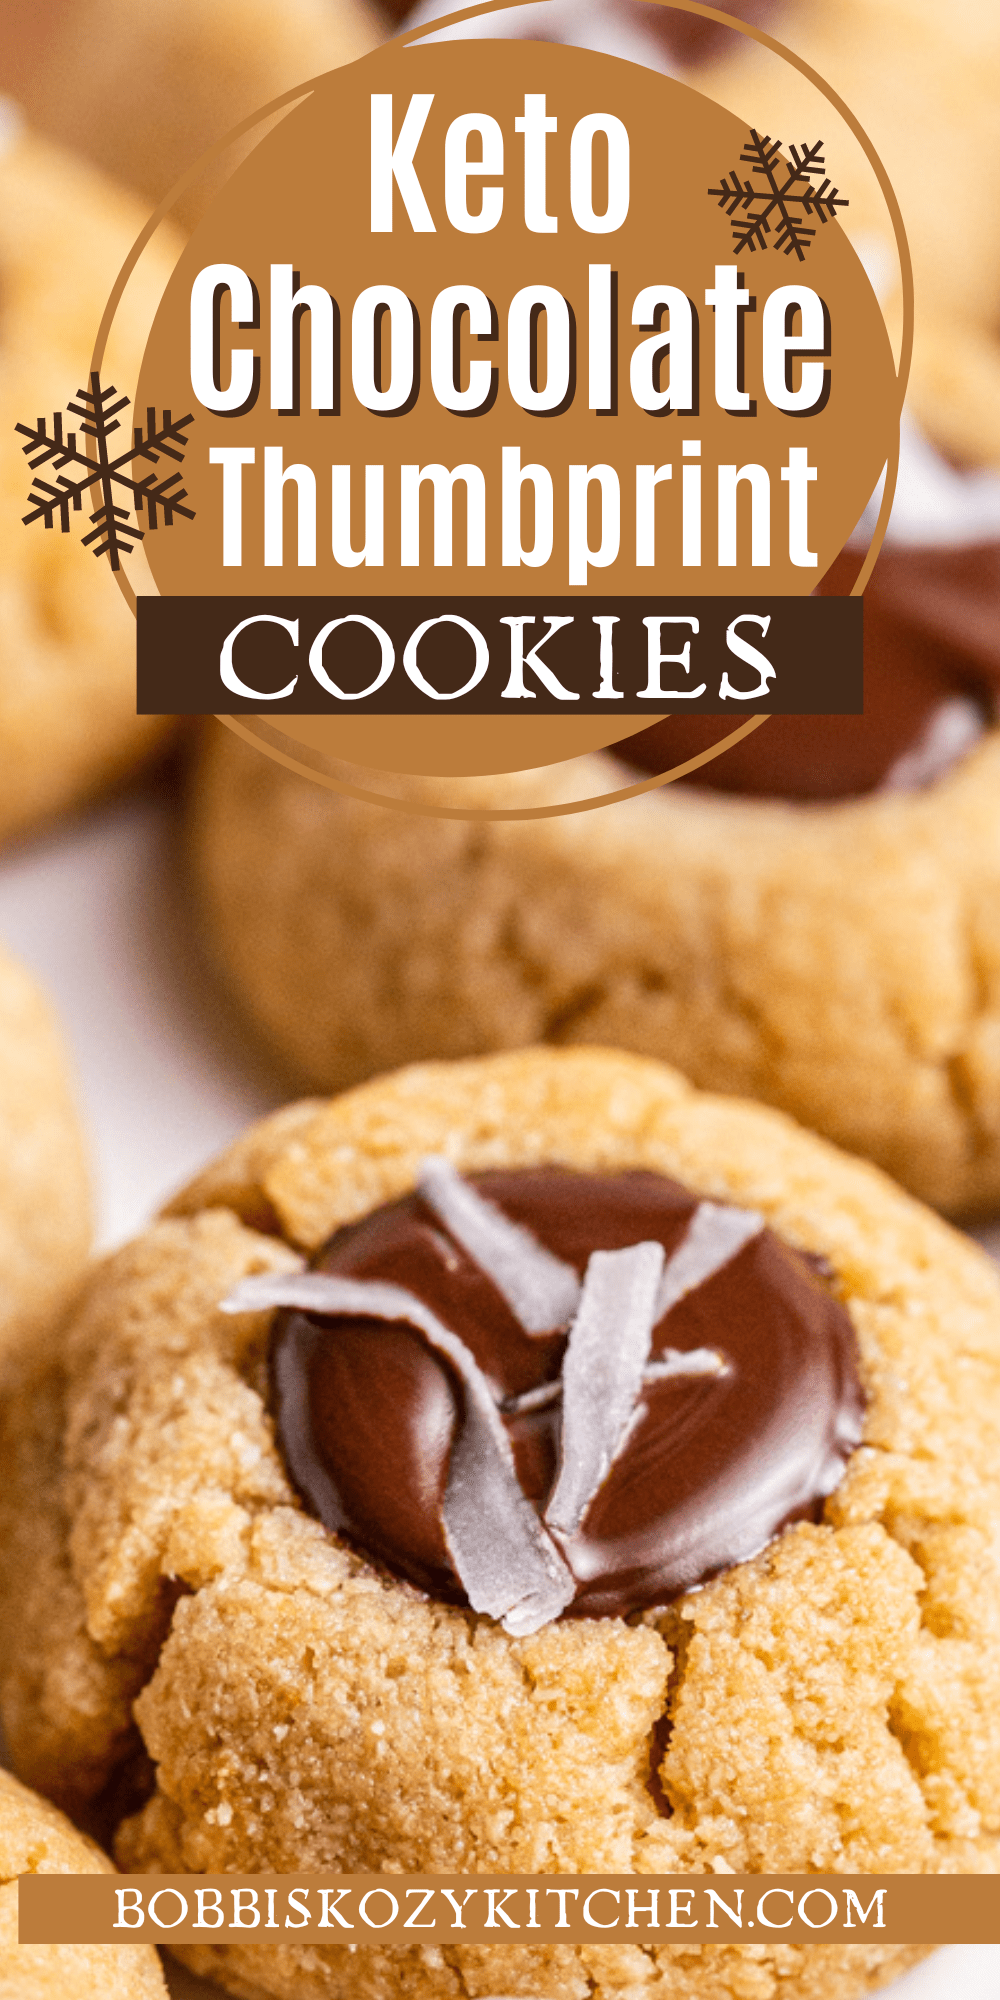 Pinterest graphic with image of keto chocolate thumbprint cookies on it.